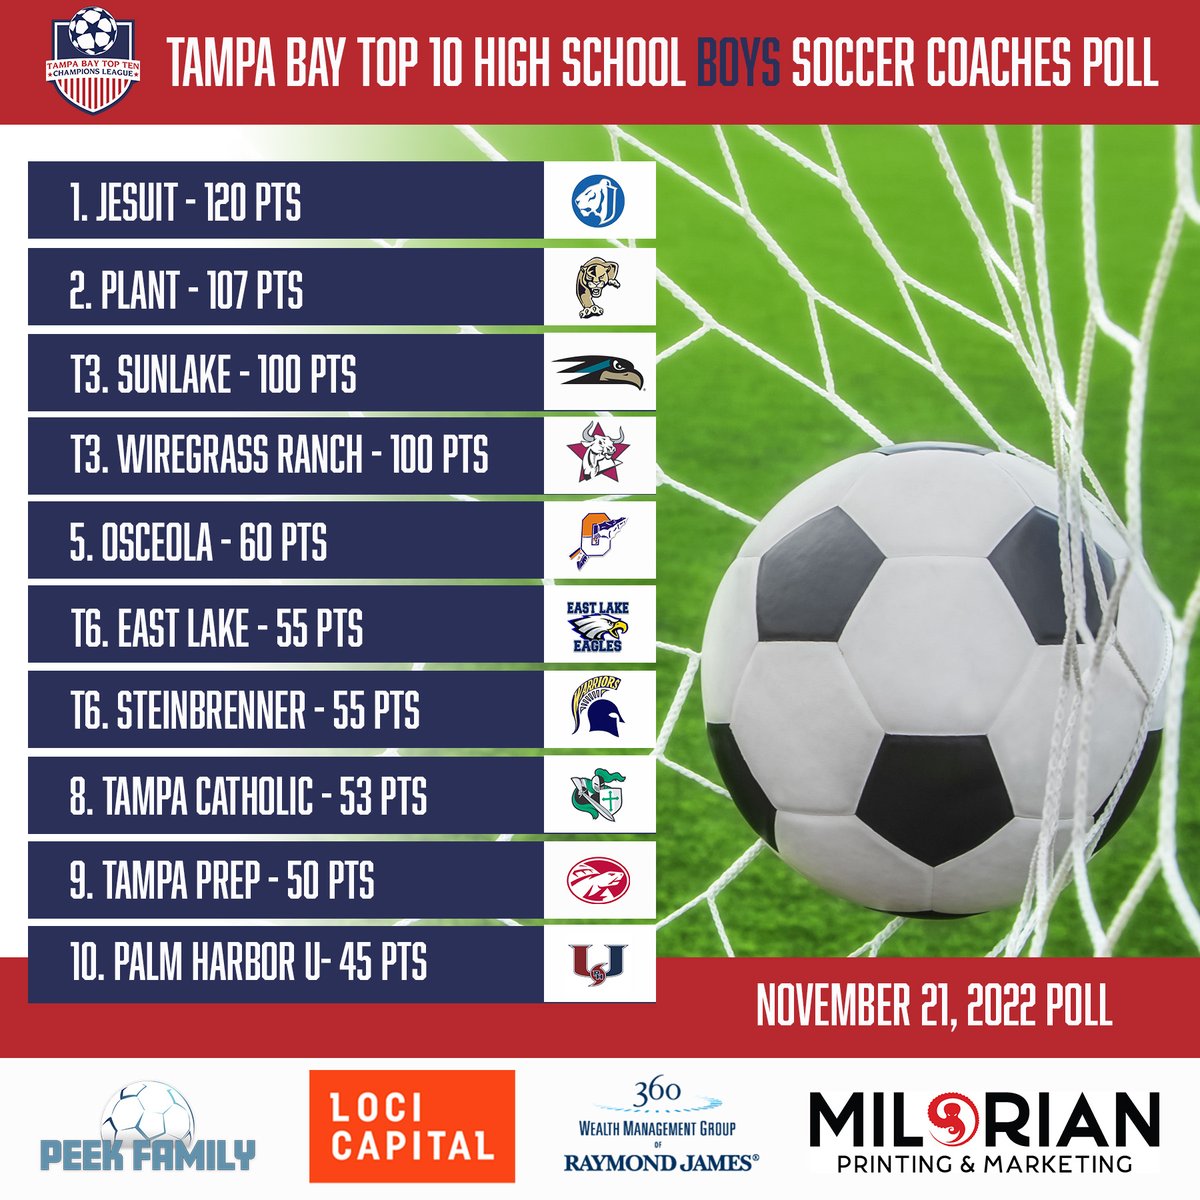 Here is the November 21, 2022 BOYS Tampa Bay Champions League Top Ten Coaches poll! Also receiving votes this week: St. Pete–45 River Ridge–38 Mitchell–29 Bloomingdale 27 Strawberry Crest-22 Sumner–20 Newsome-11 Wesley Chapel–11 Calvary-5 Berkeley–4 Sickles-3 Robinson–2 CDS-1